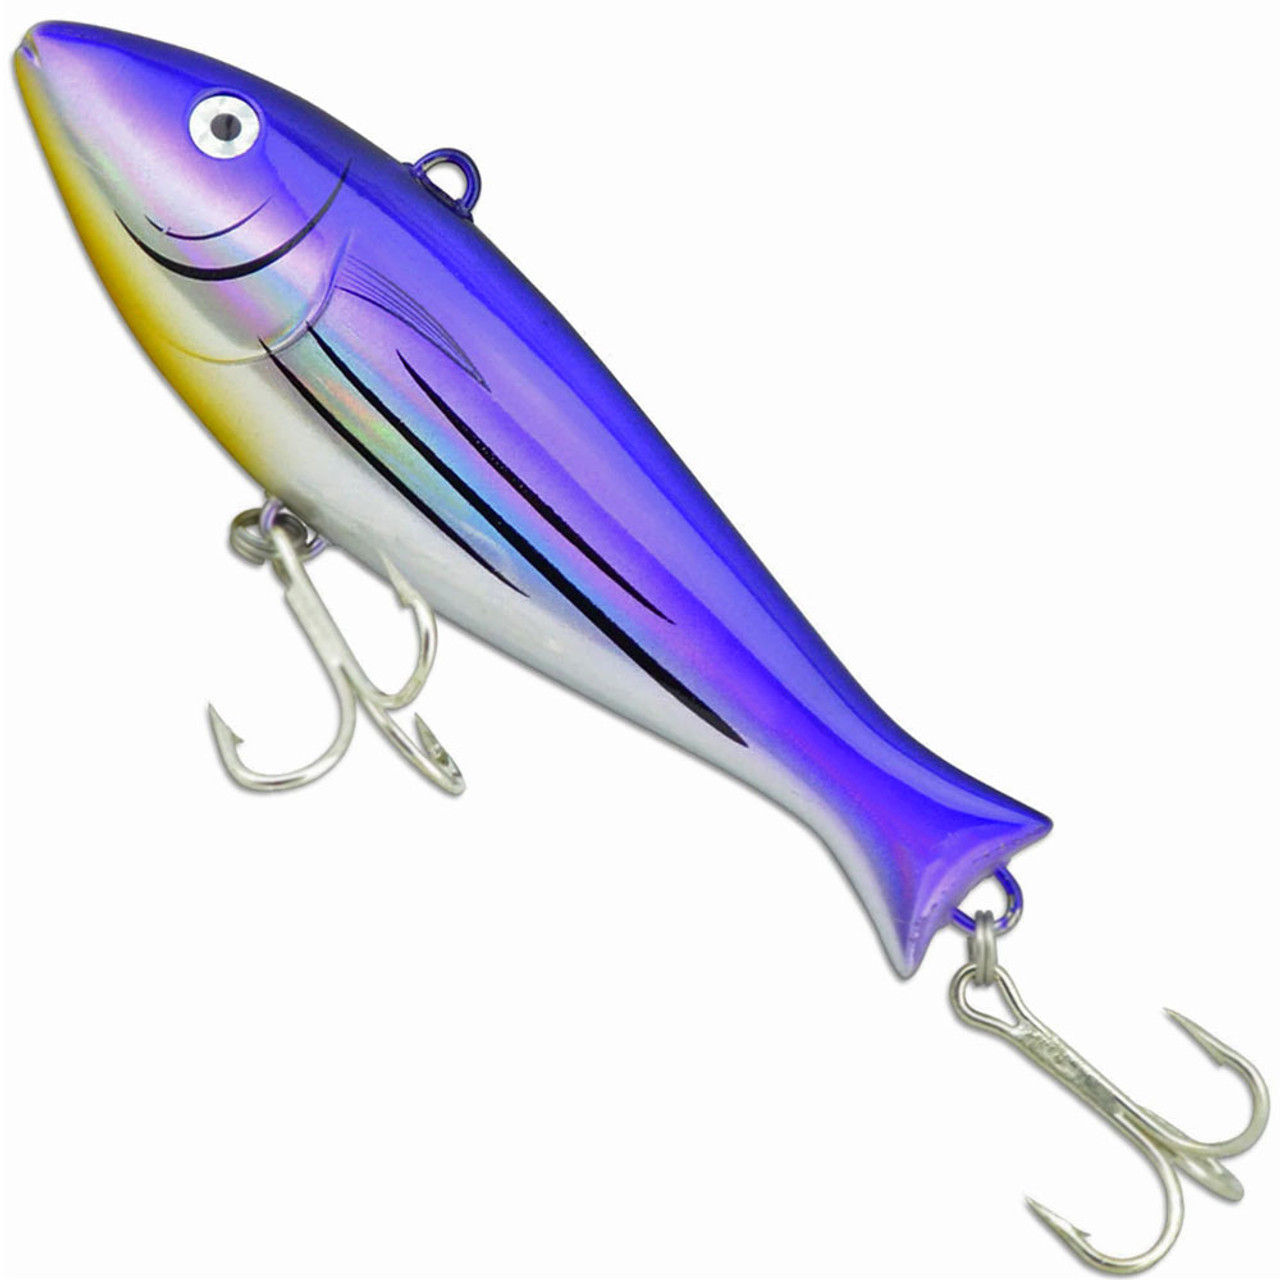 https://cdn11.bigcommerce.com/s-55834/images/stencil/1280x1280/products/1670/16484/halco-giant-trember-fishing-lures__55542.1565085544.jpg?c=2